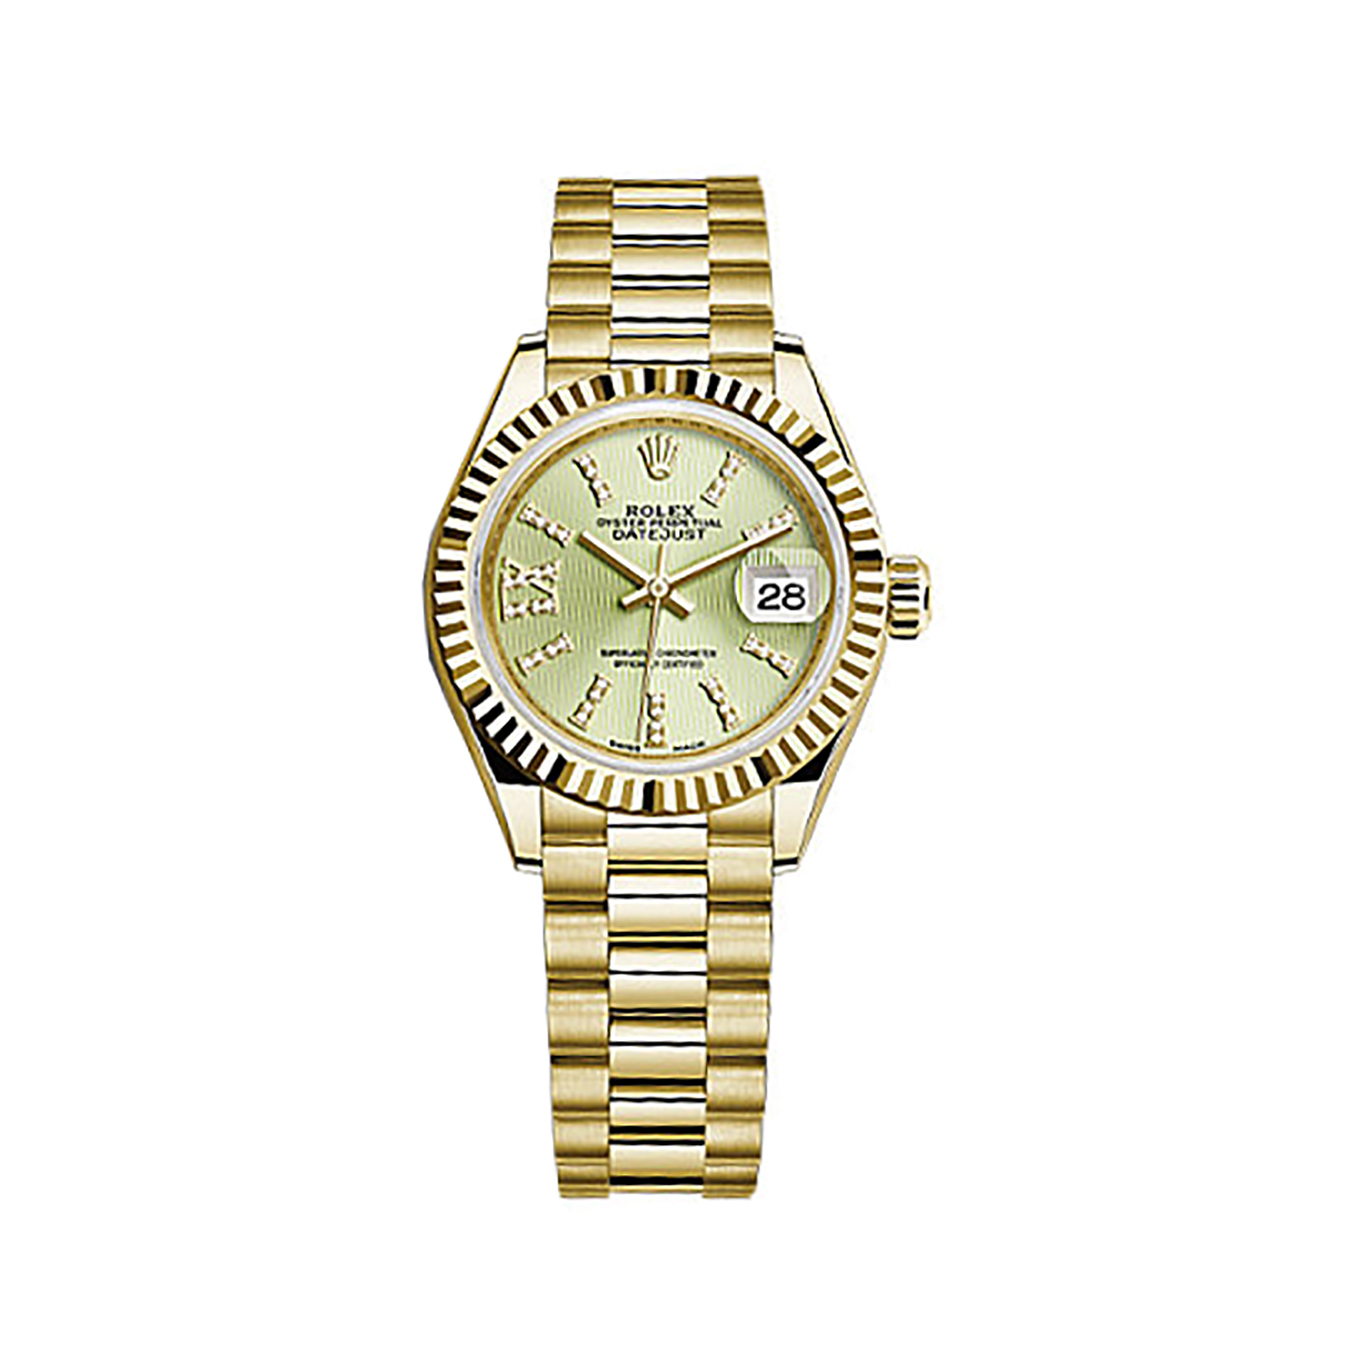 Lady-Datejust 28 279178 Gold Watch (Linden Set with Diamonds)